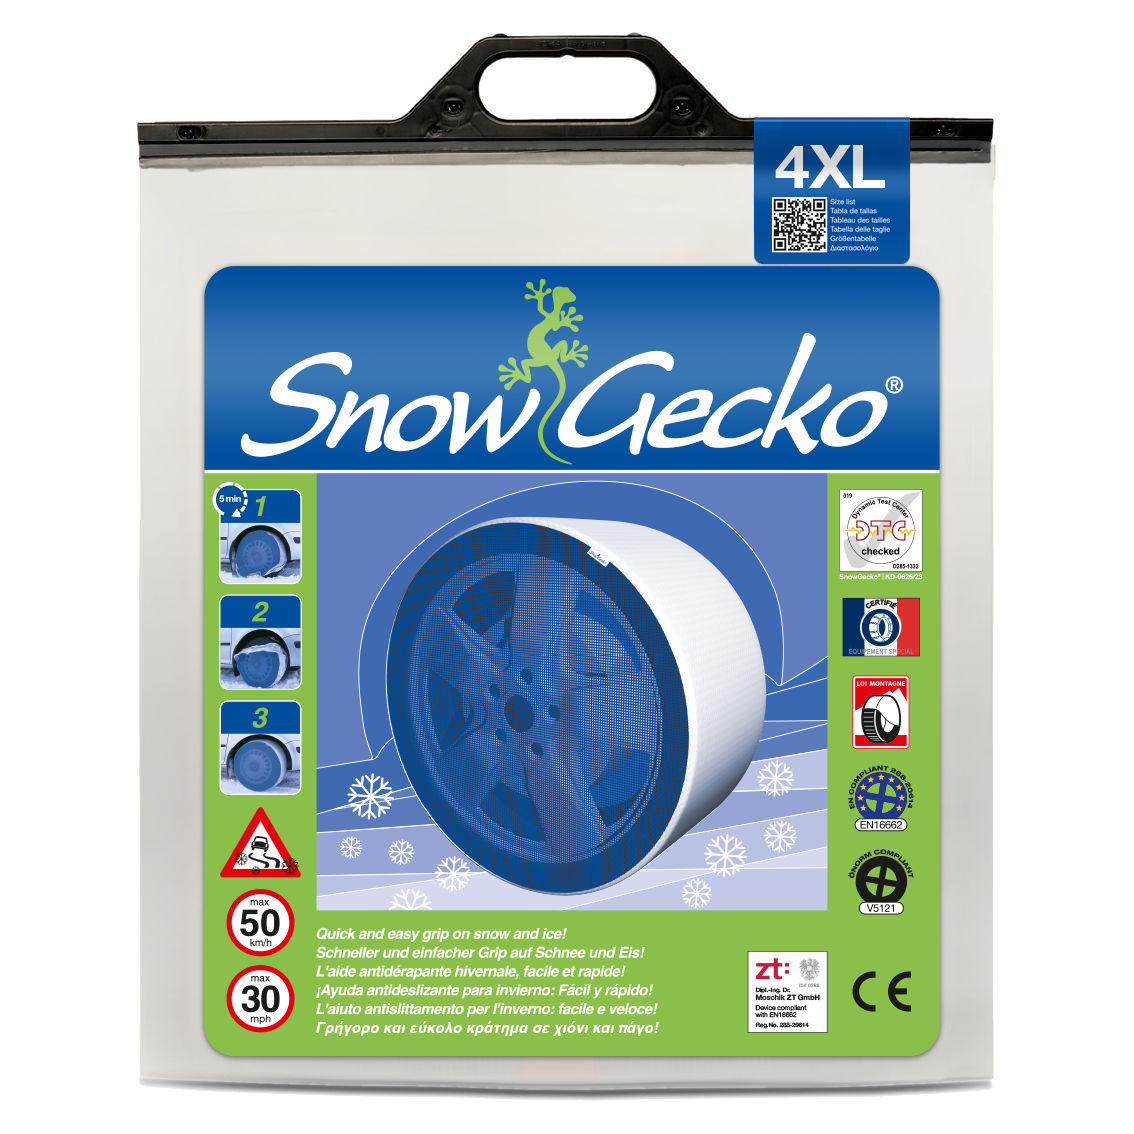 SnowGecko 4XL product packaging front side